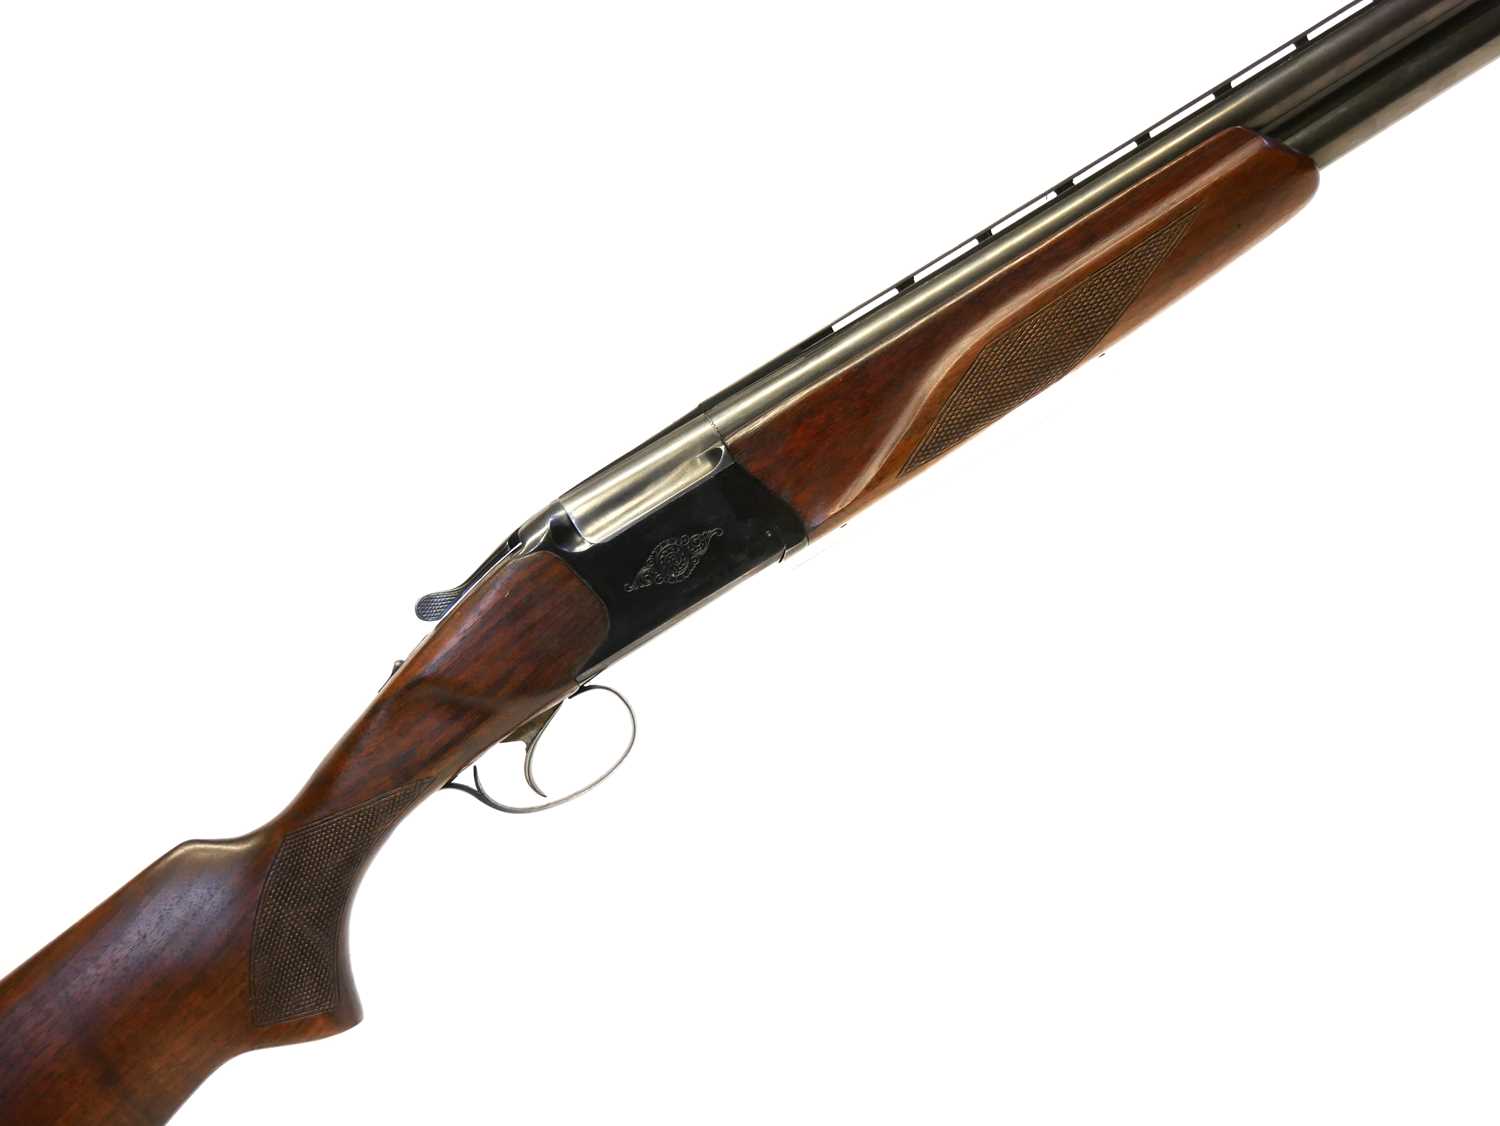 Lot 252 - Baikal 12 bore over and under shotgun LICECNE REQUIRED